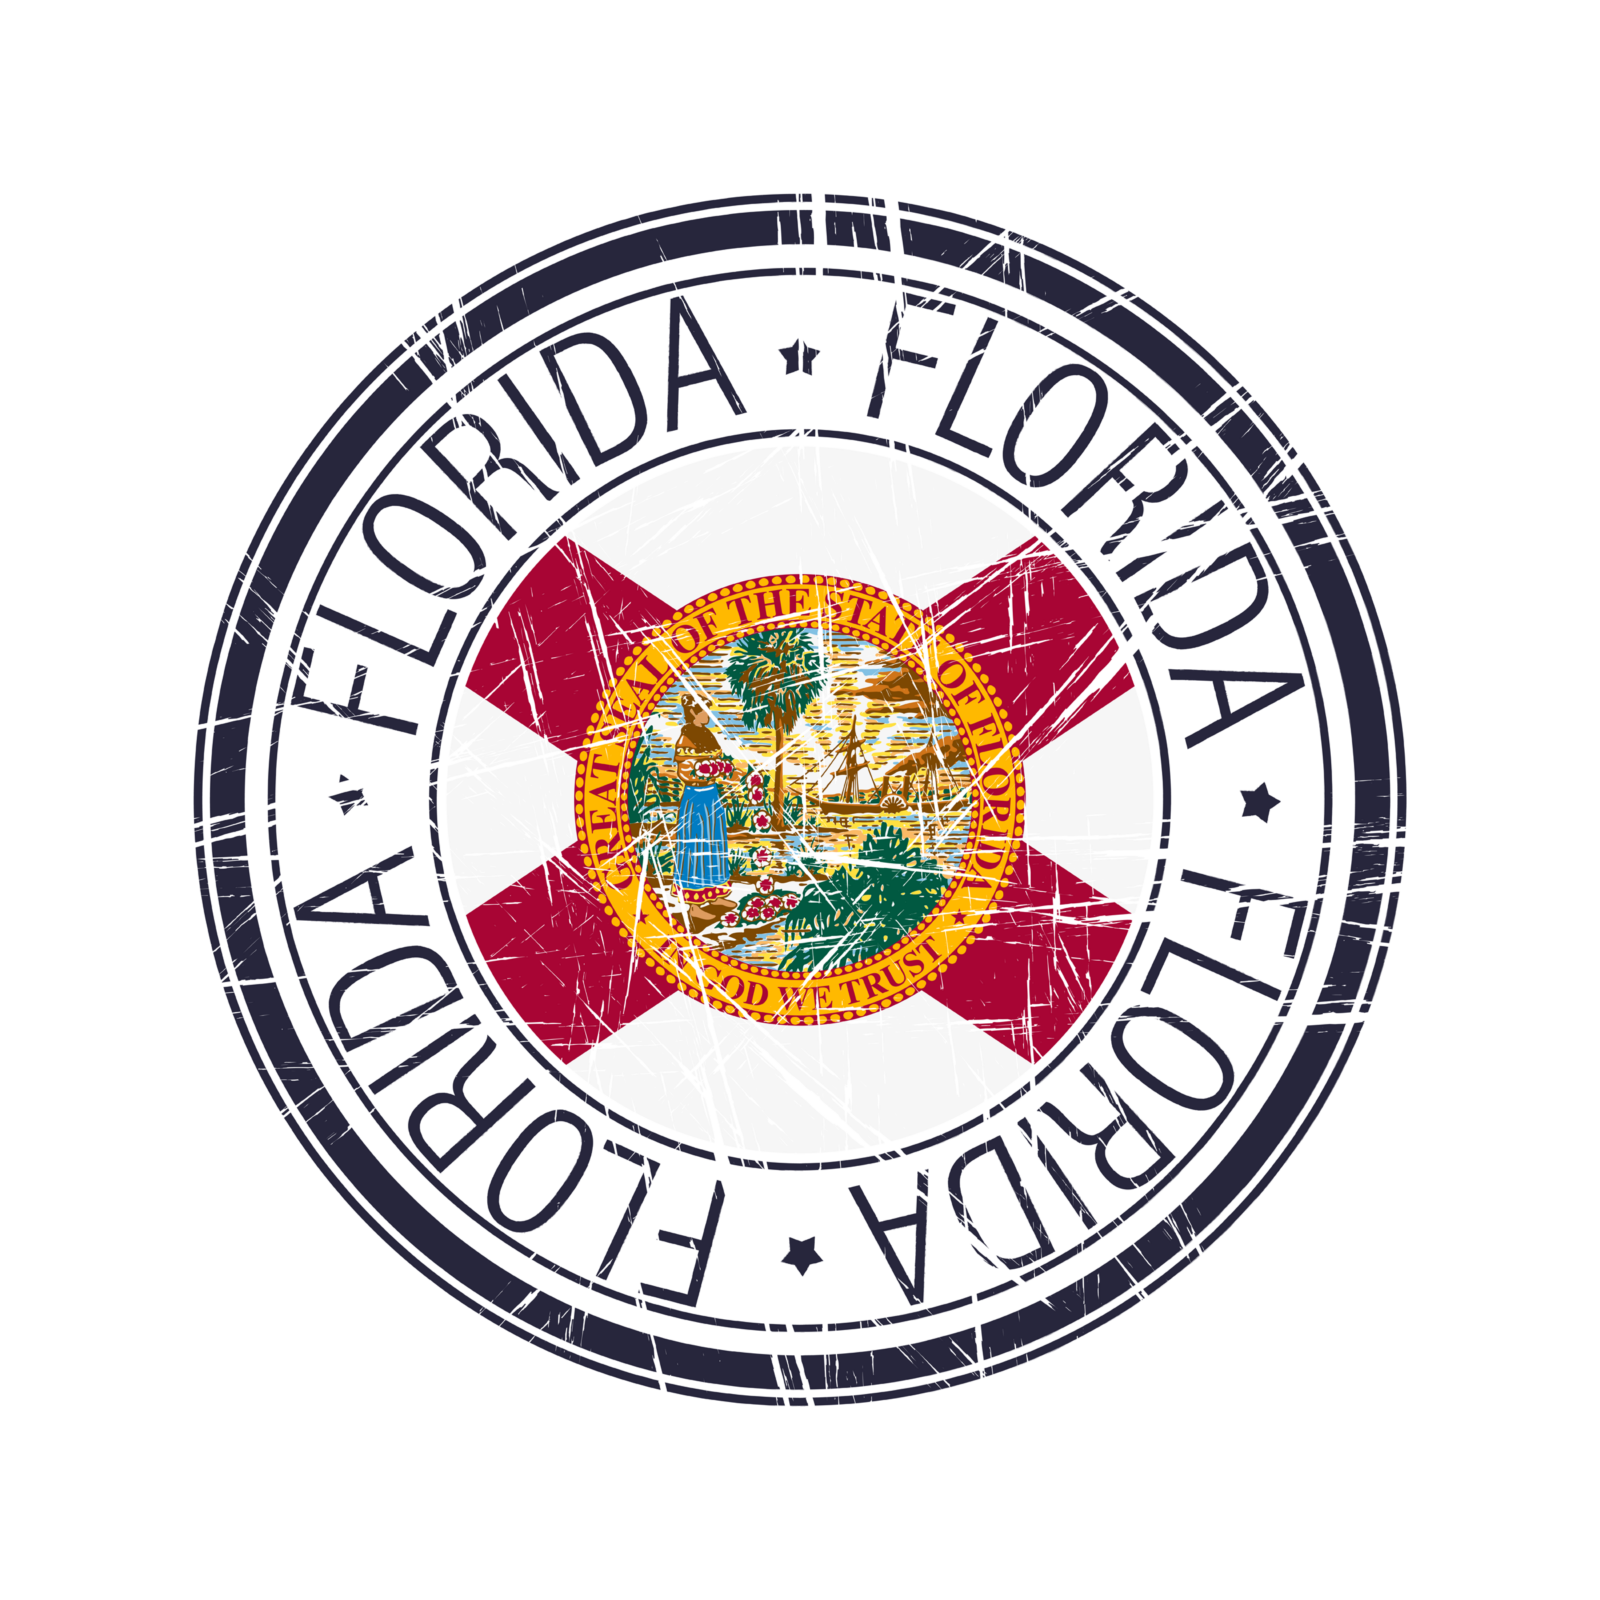 Штамп штата Флорида. Great Seal of the State of Florida. Florida round